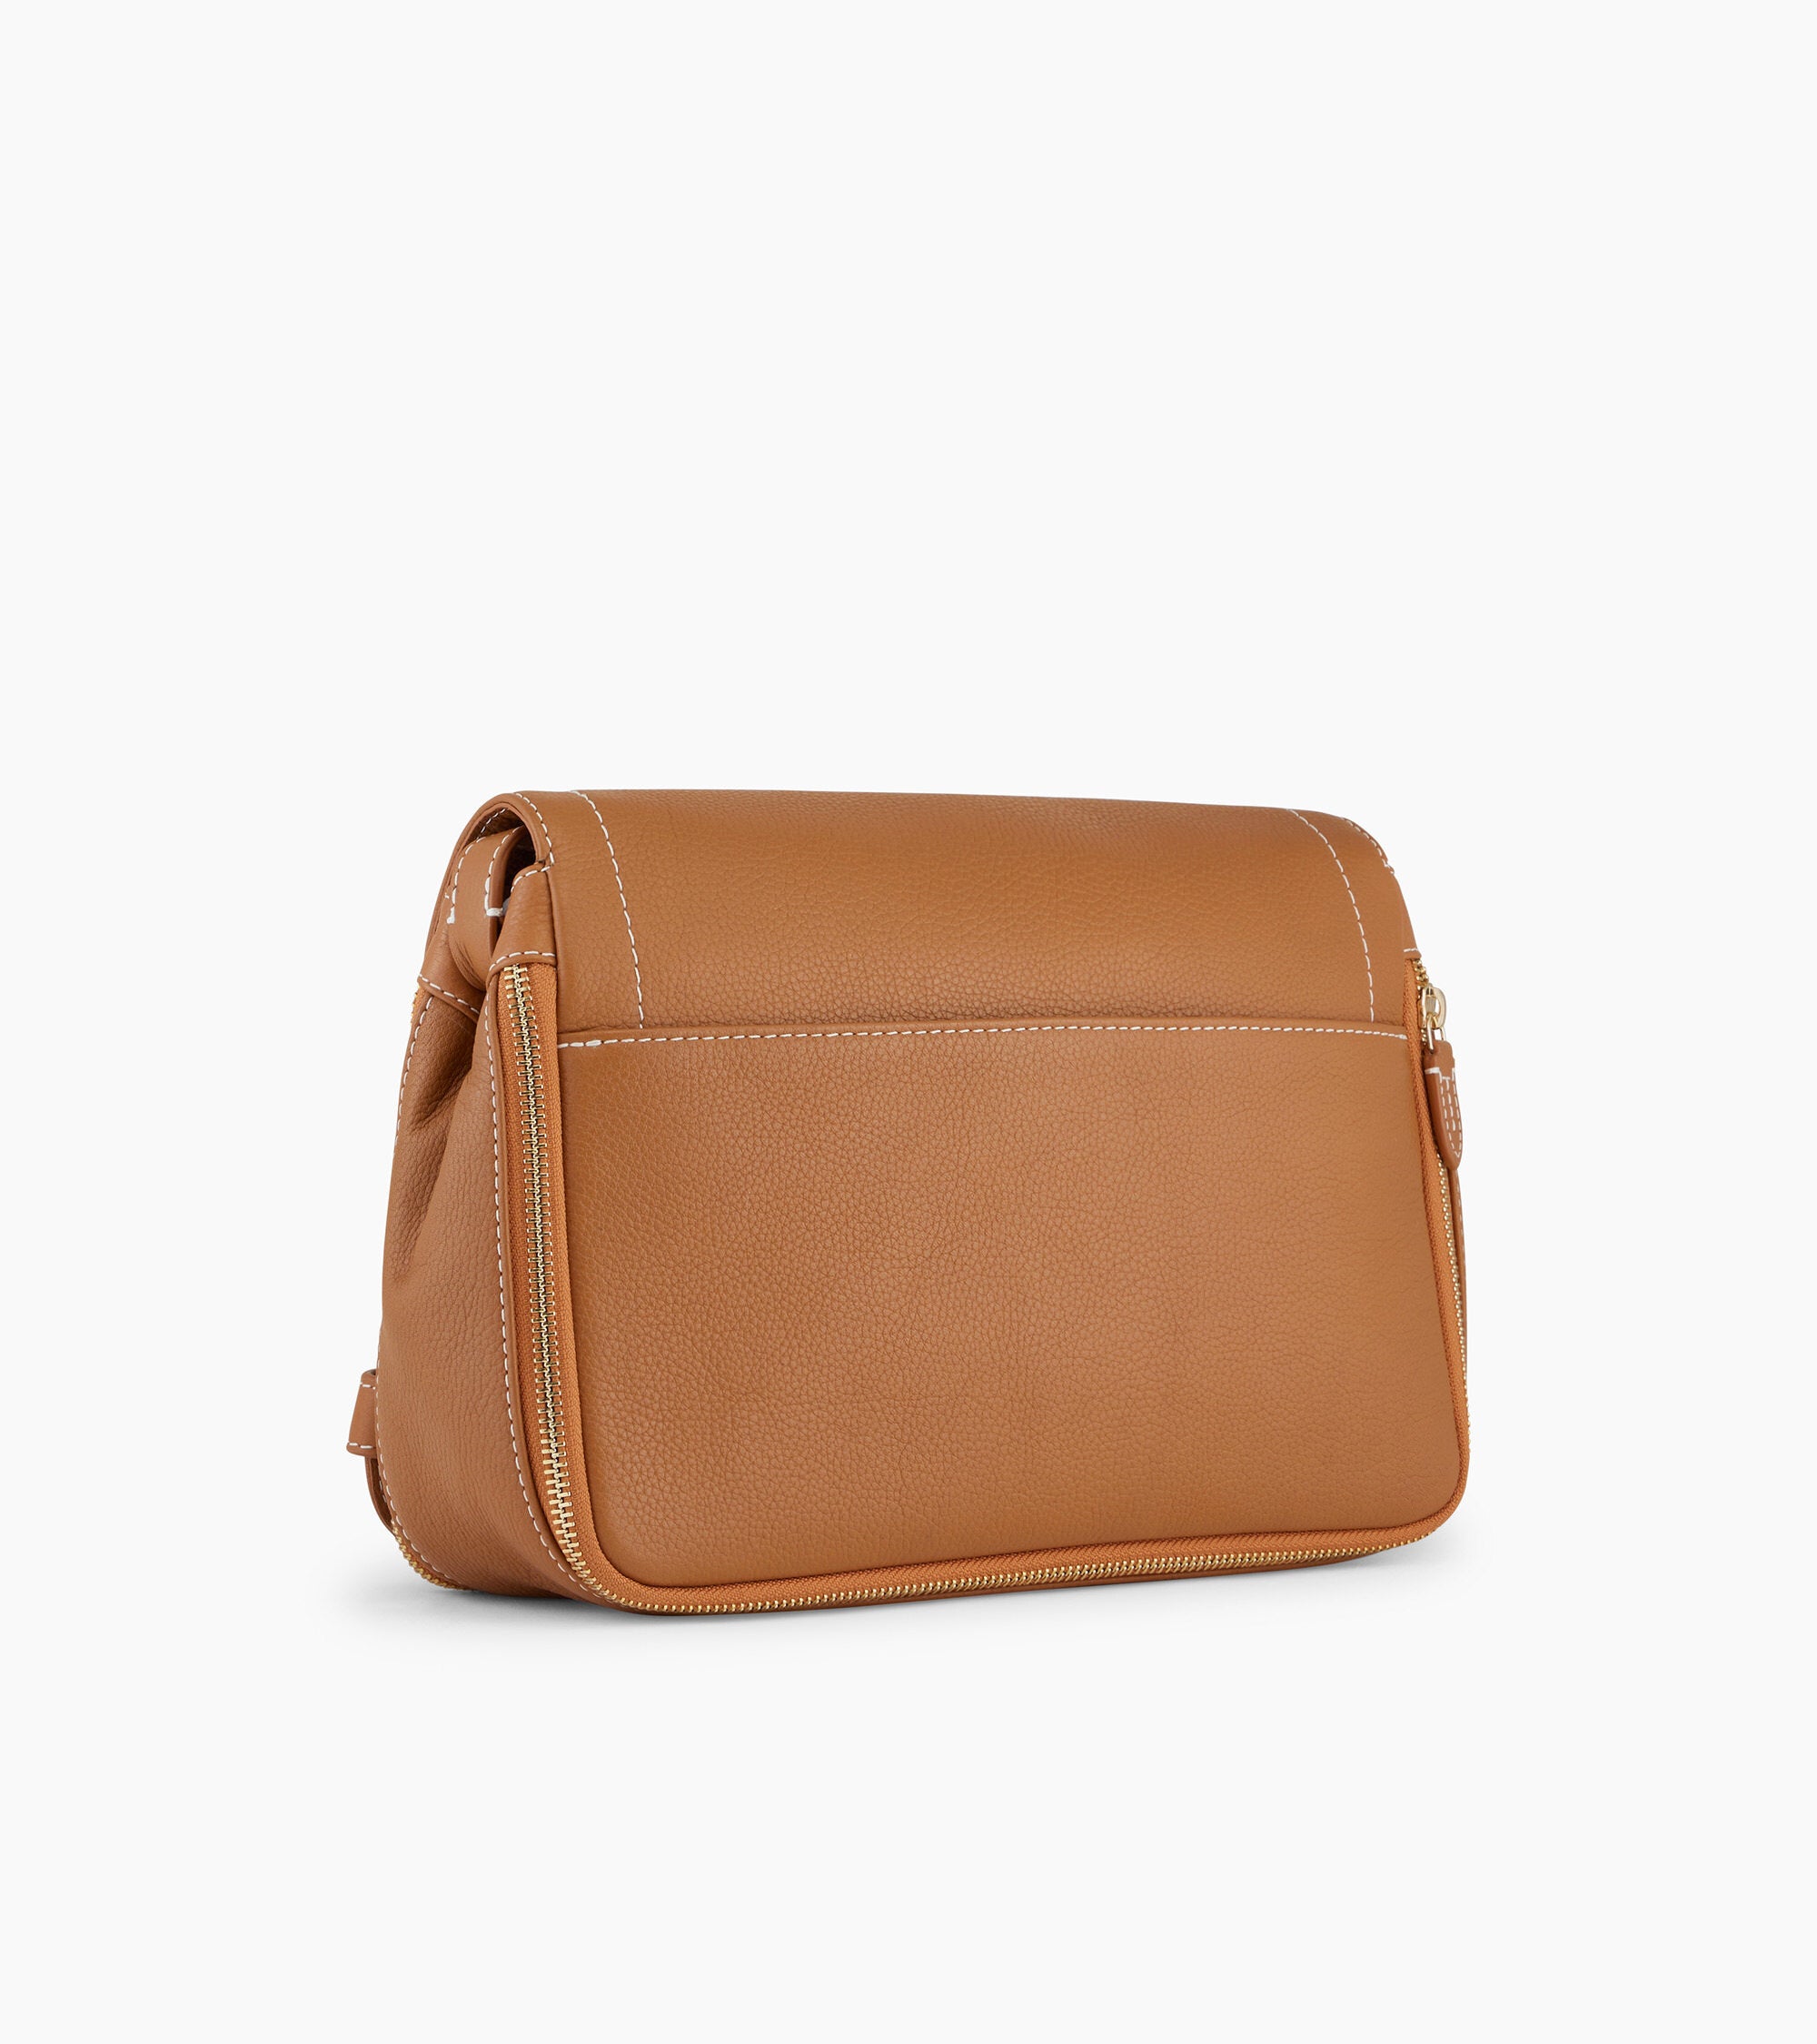 Simone medium-sized bag with crossbody strap in pebbled leather